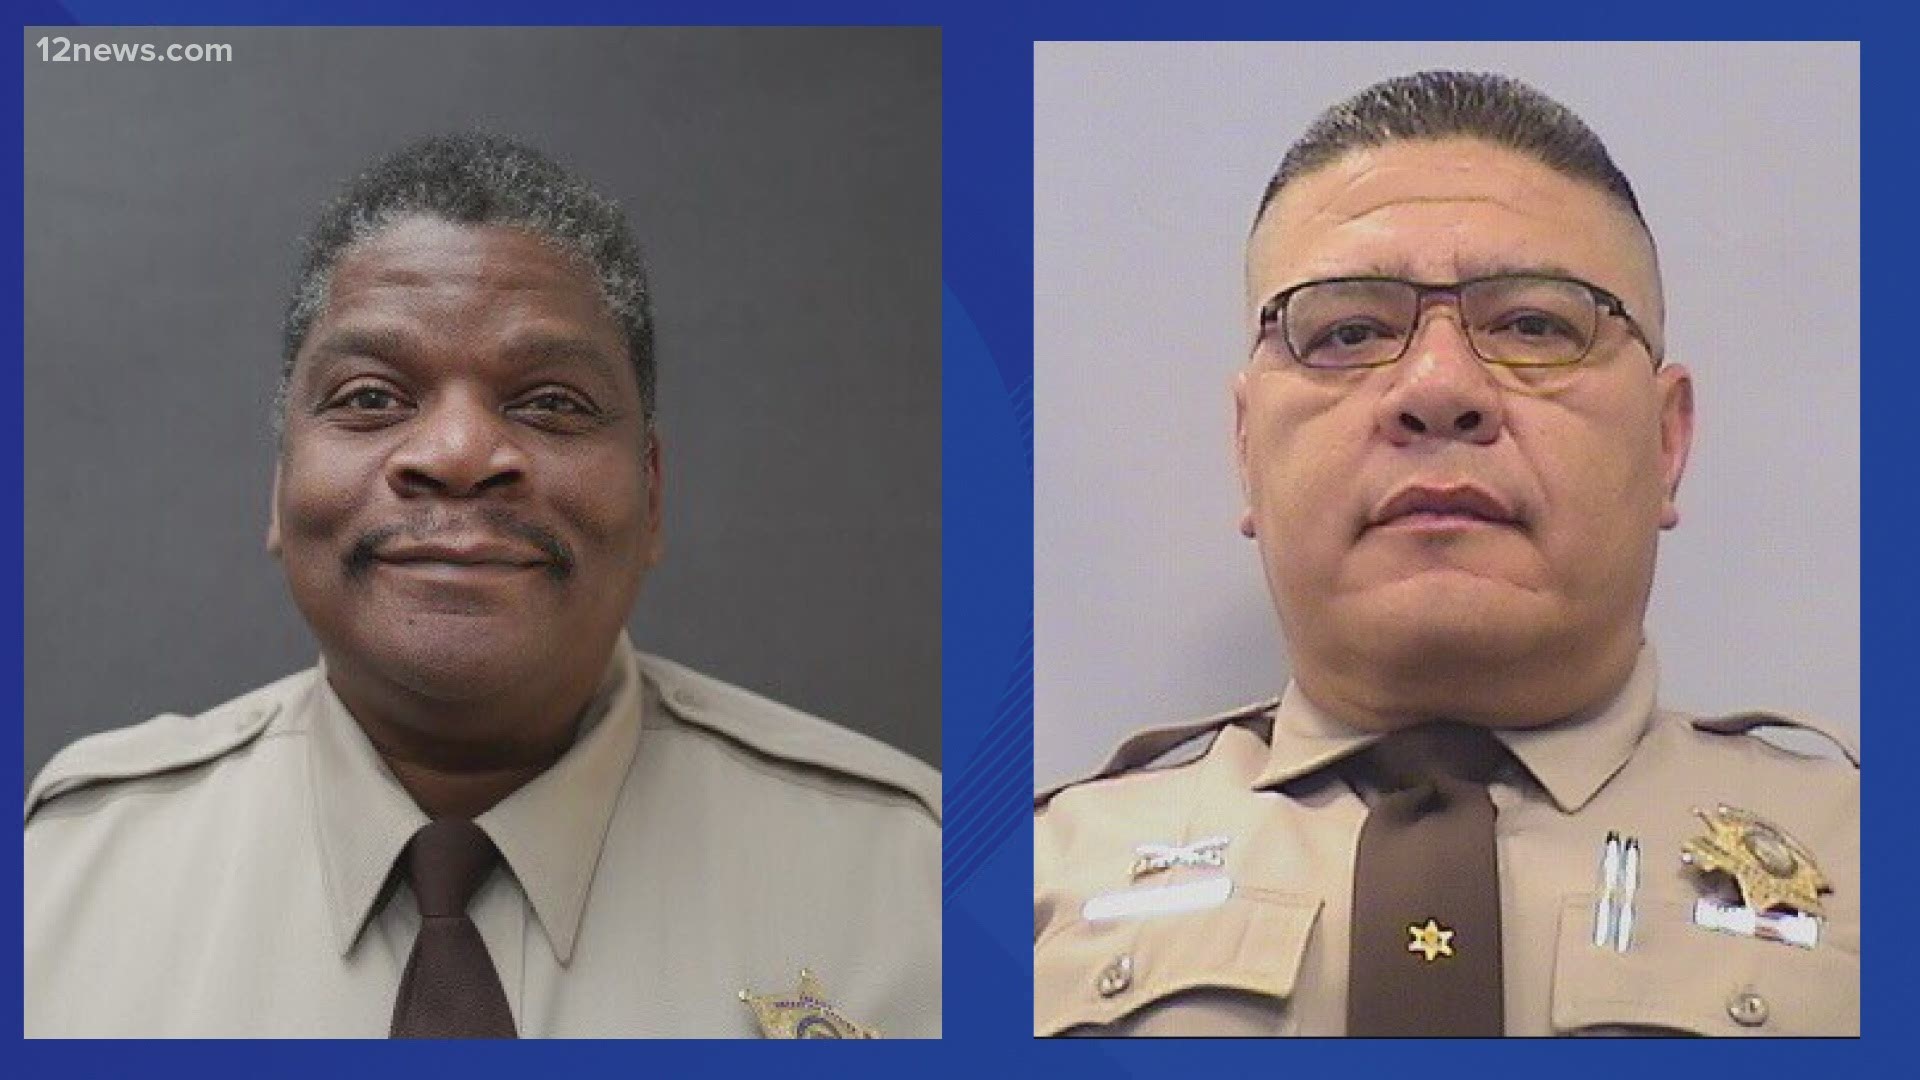 Sgt. Ernie Quintero and Detention Officer Kevin Fletcher both died Monday.